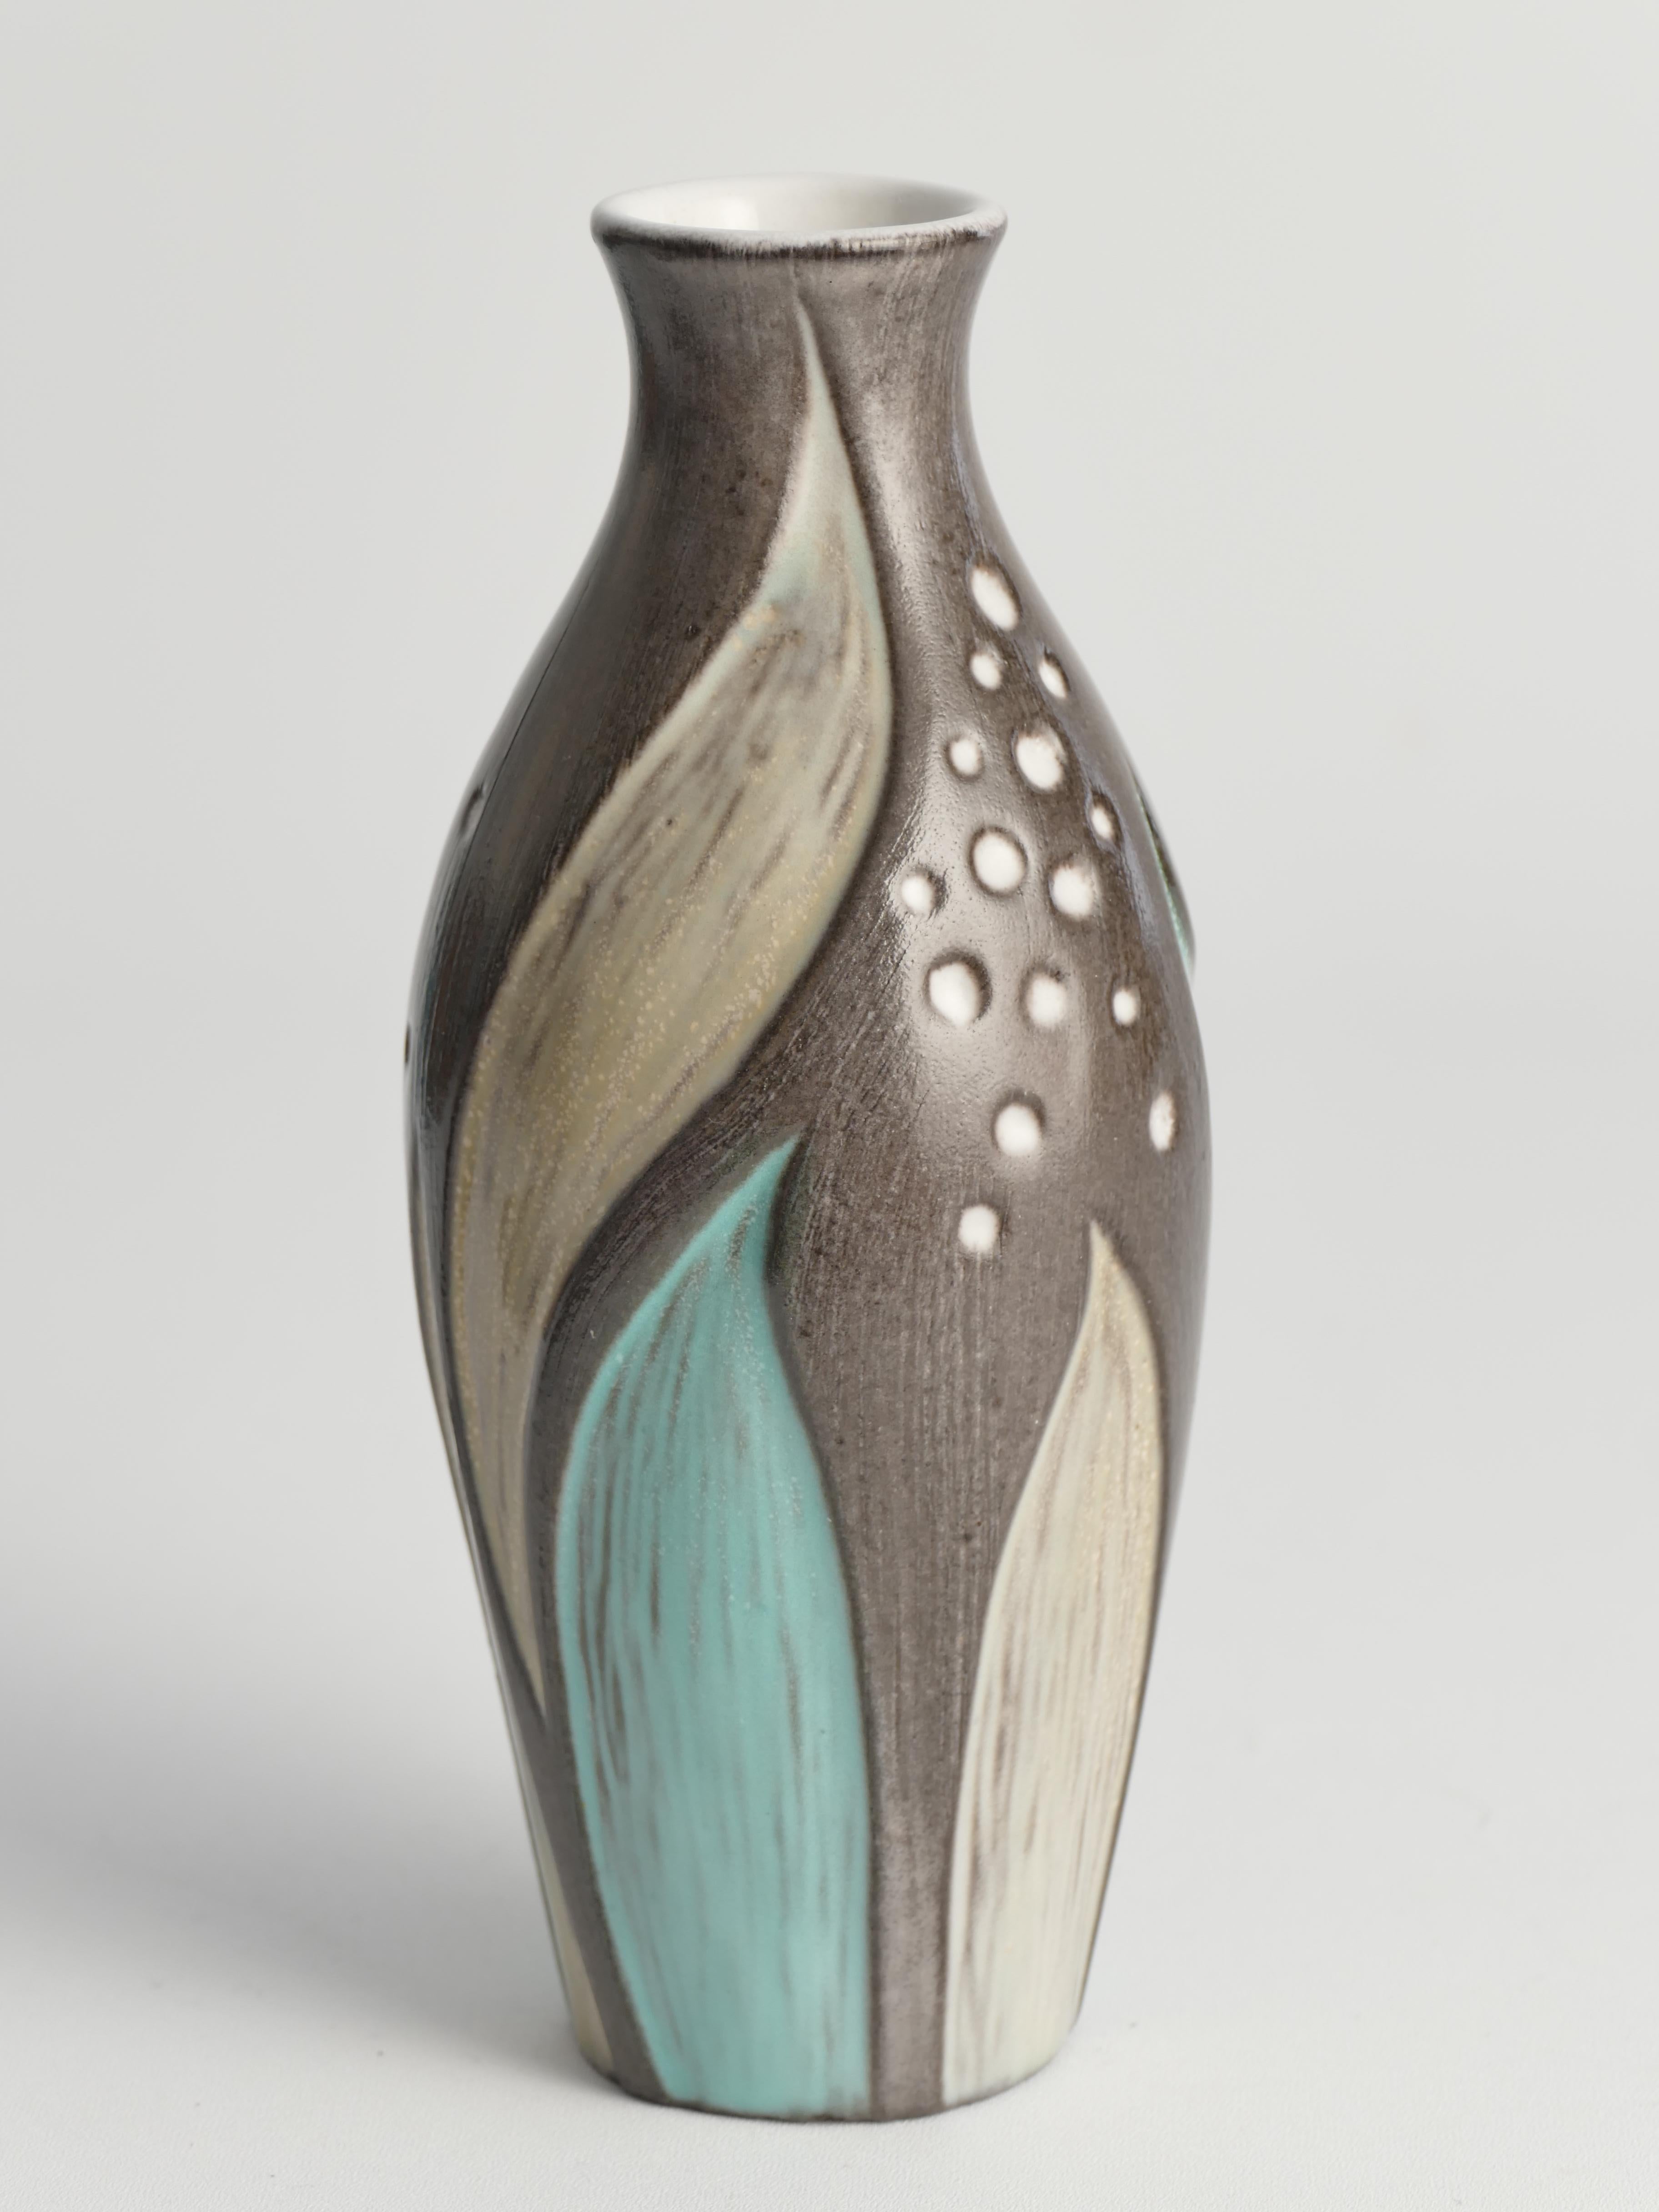 Ceramic Vase with Seaweed Motif by Mari Simmulson for Upsala Ekeby, Sweden 1950s For Sale 2